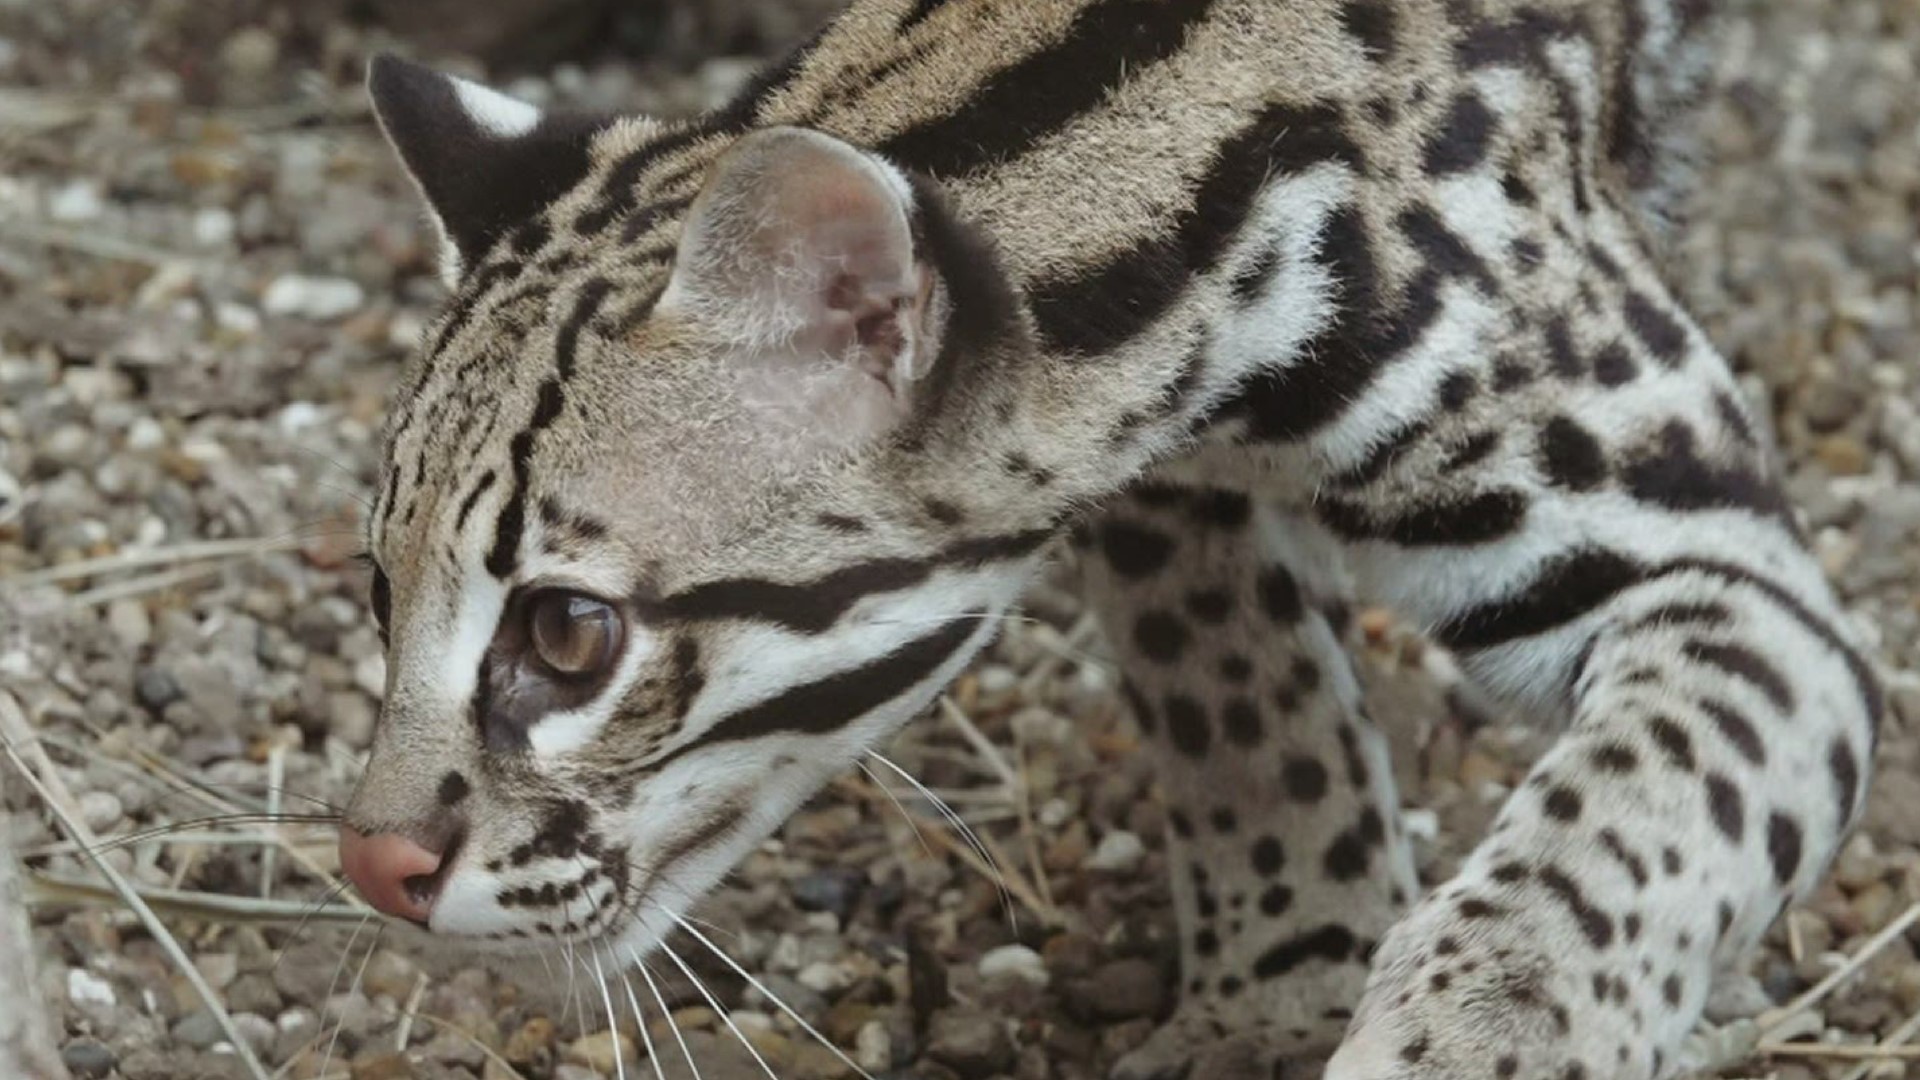 Since their arrival, the ocelots have been acclimating to their new home.